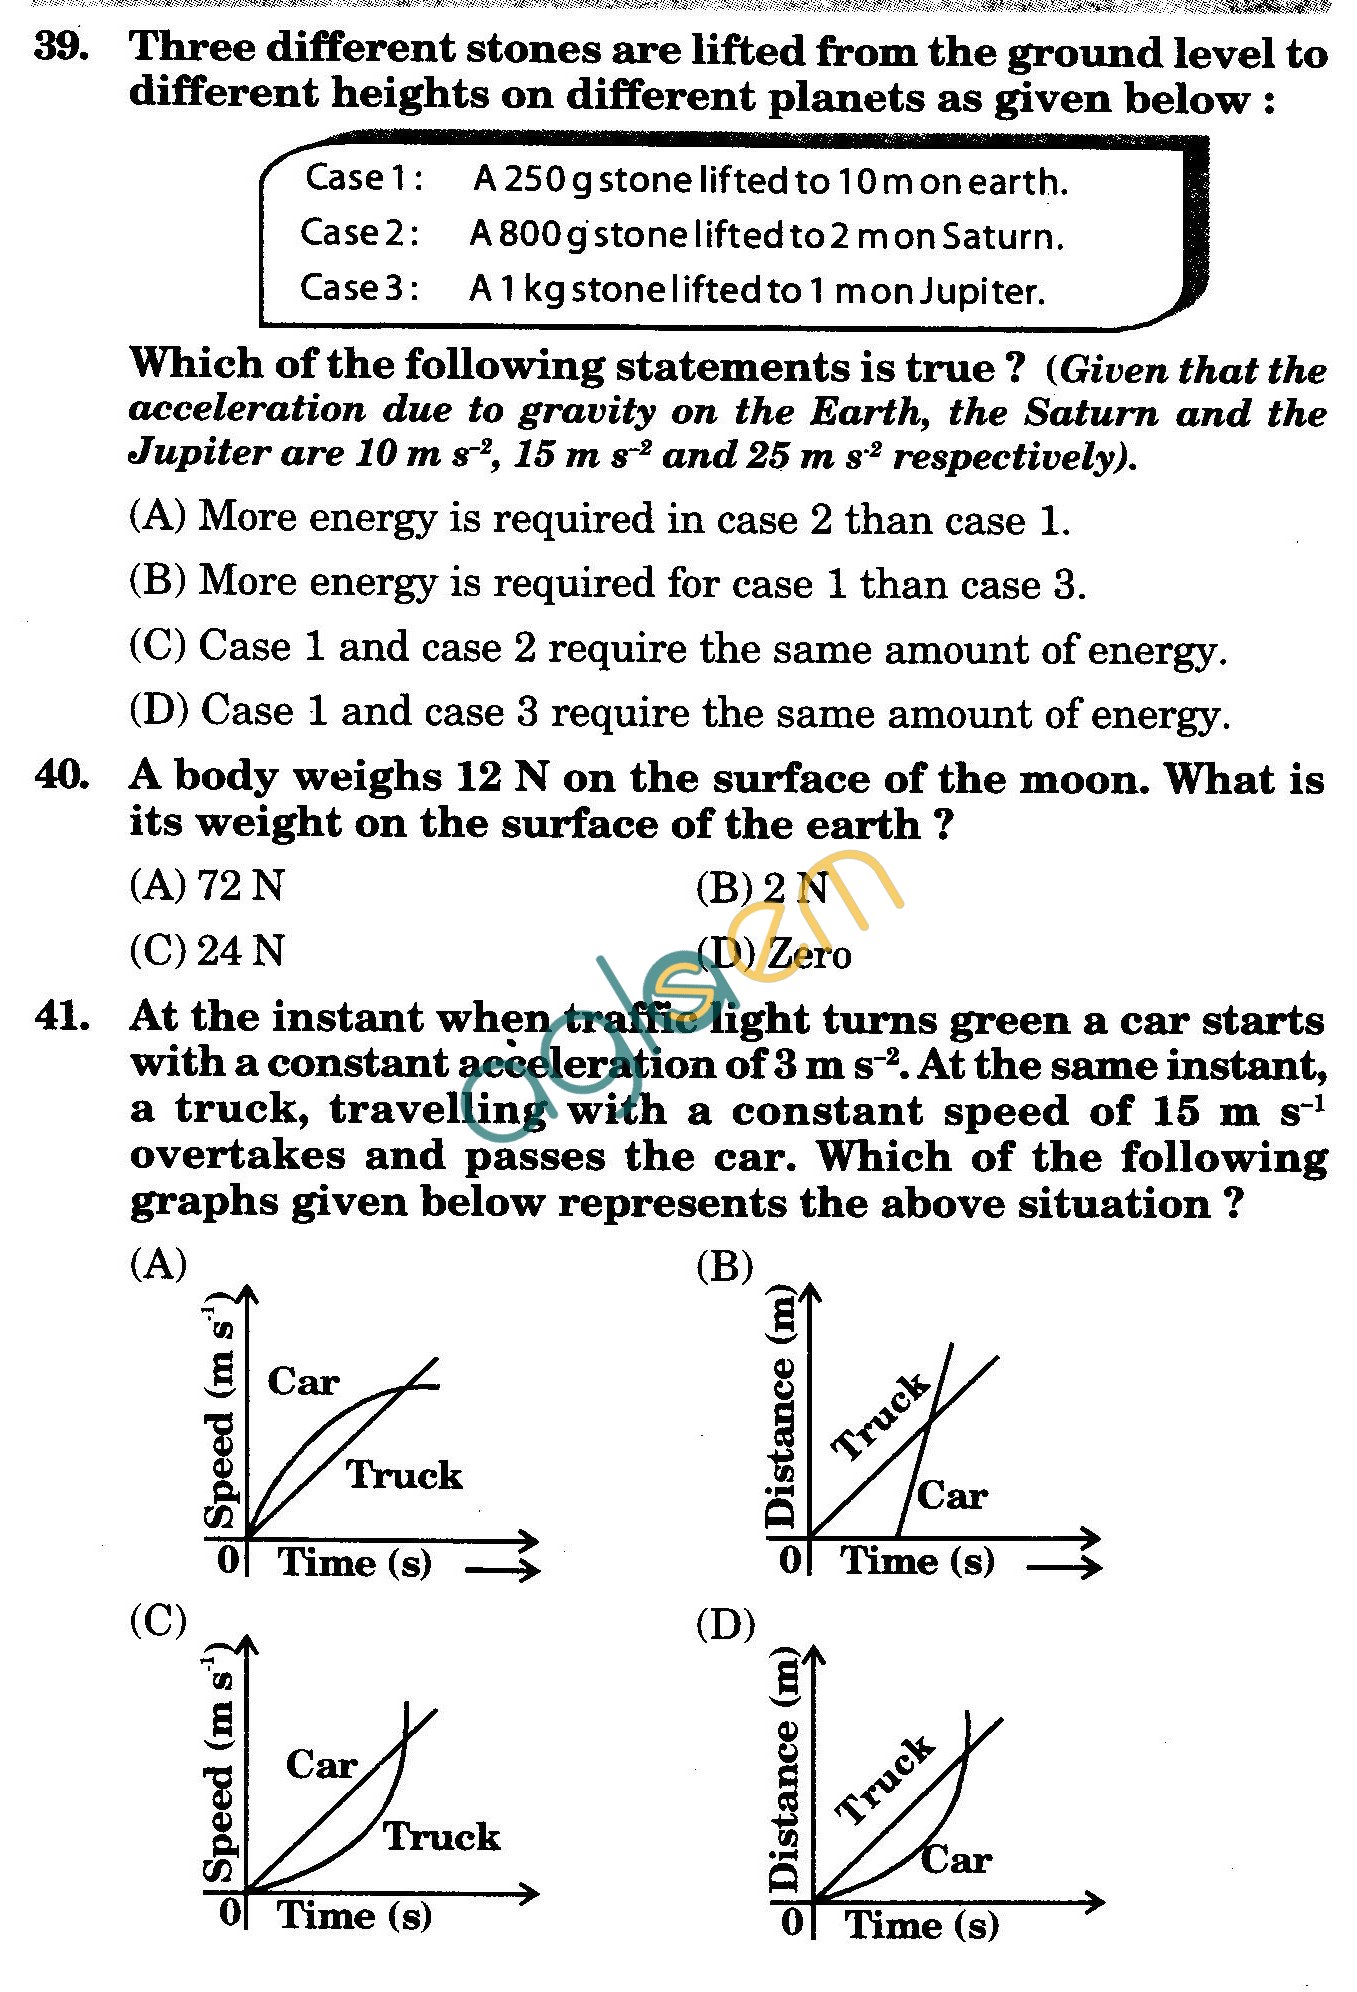 NSTSE 2010: Class IX Question Paper with Answers - Physics